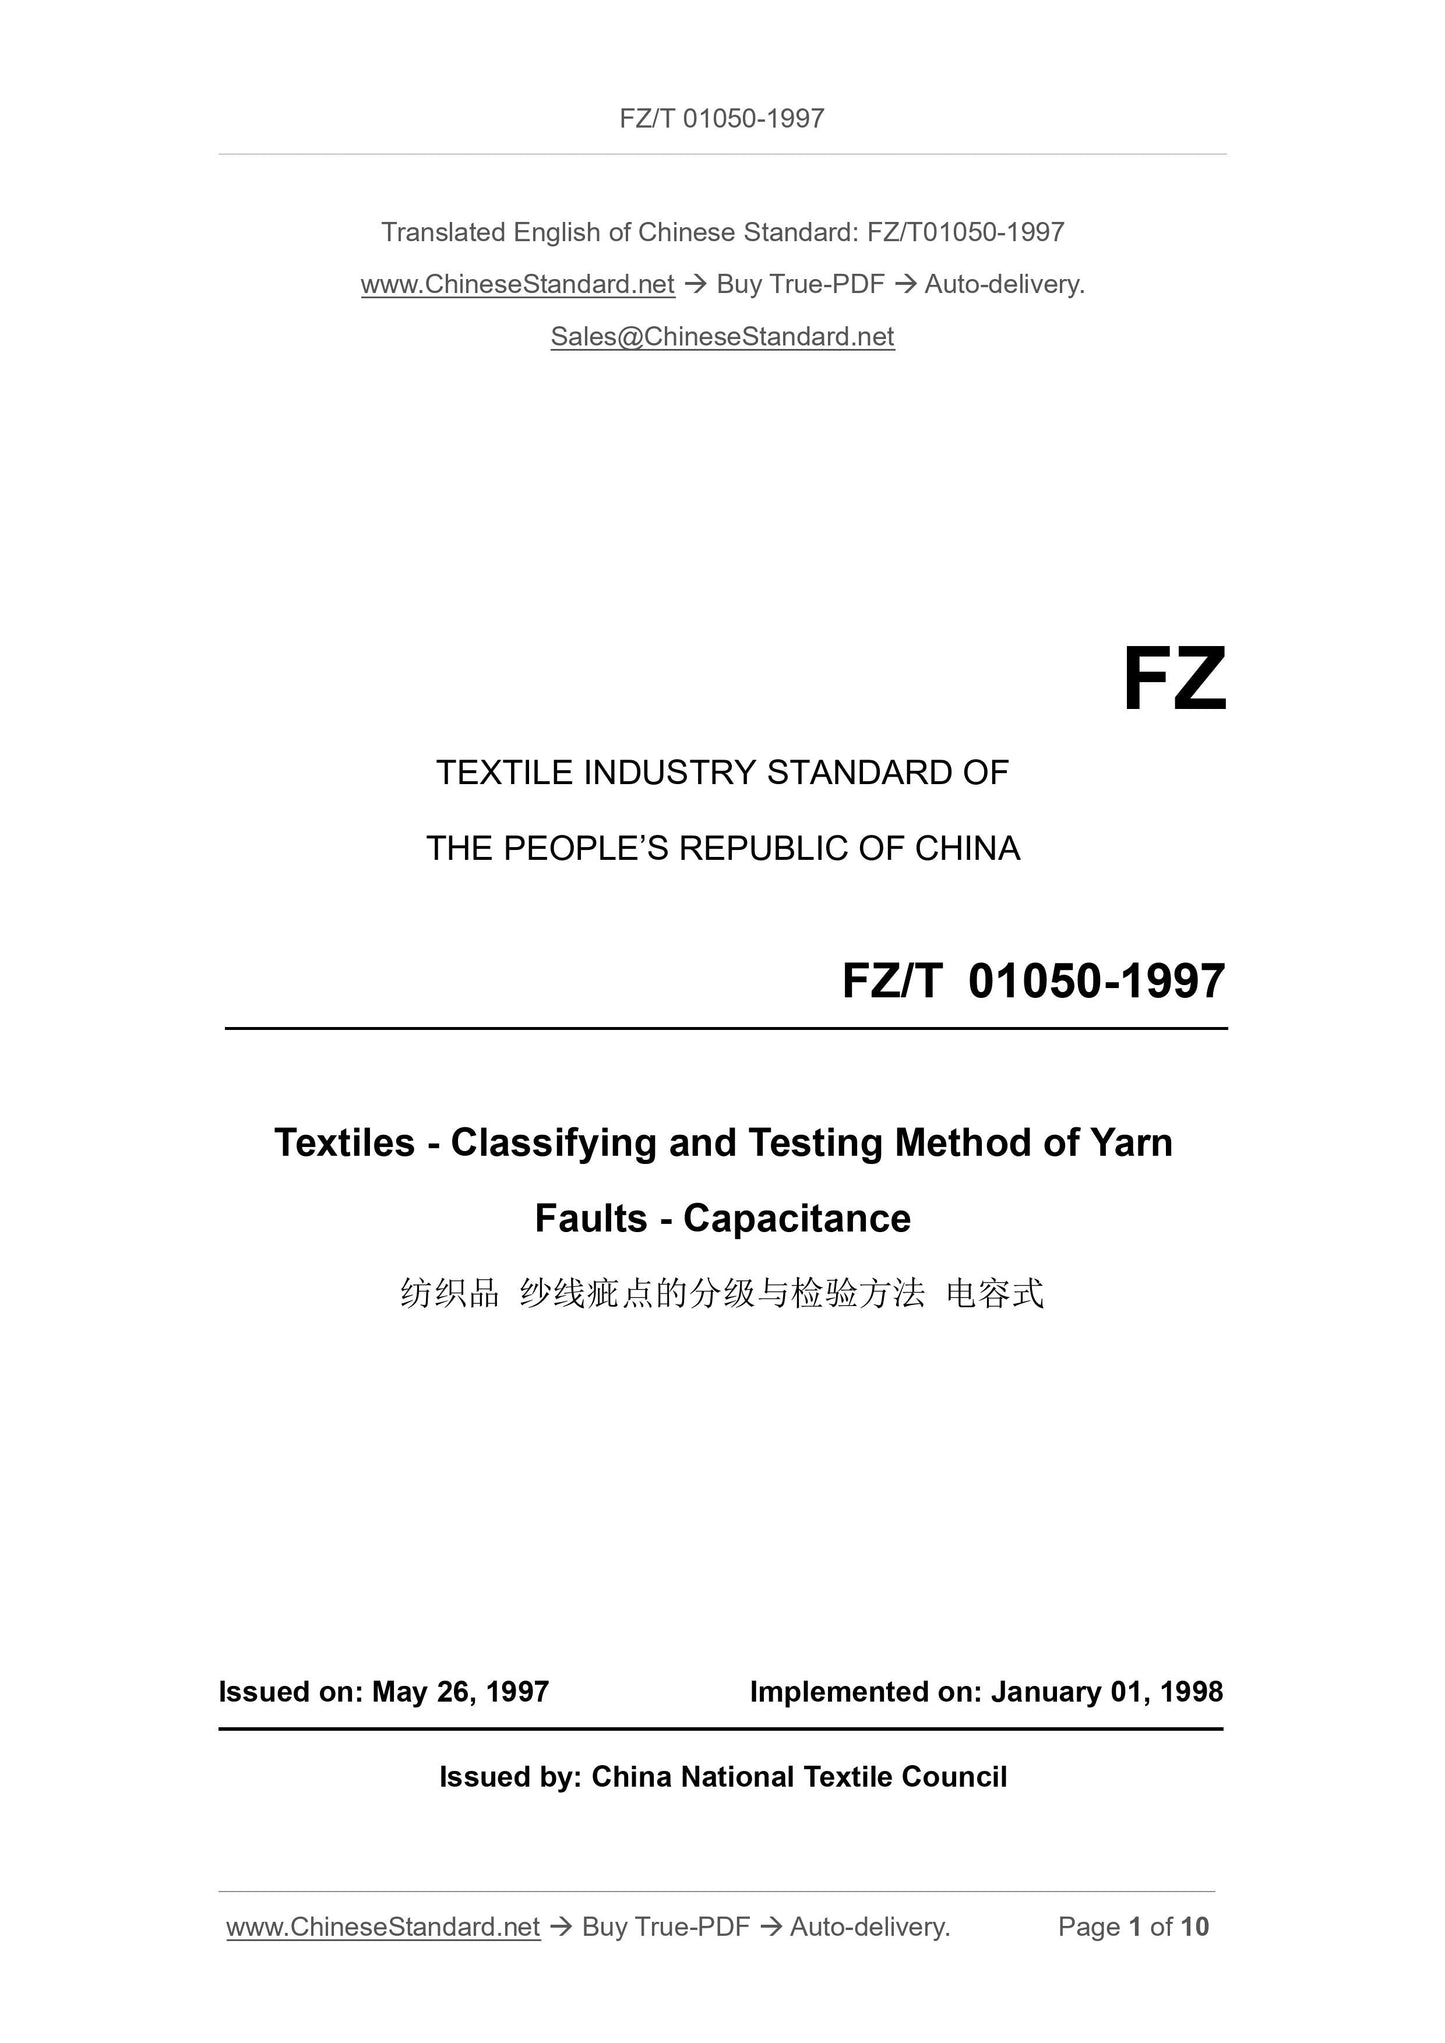 FZ/T 01050-1997 Page 1